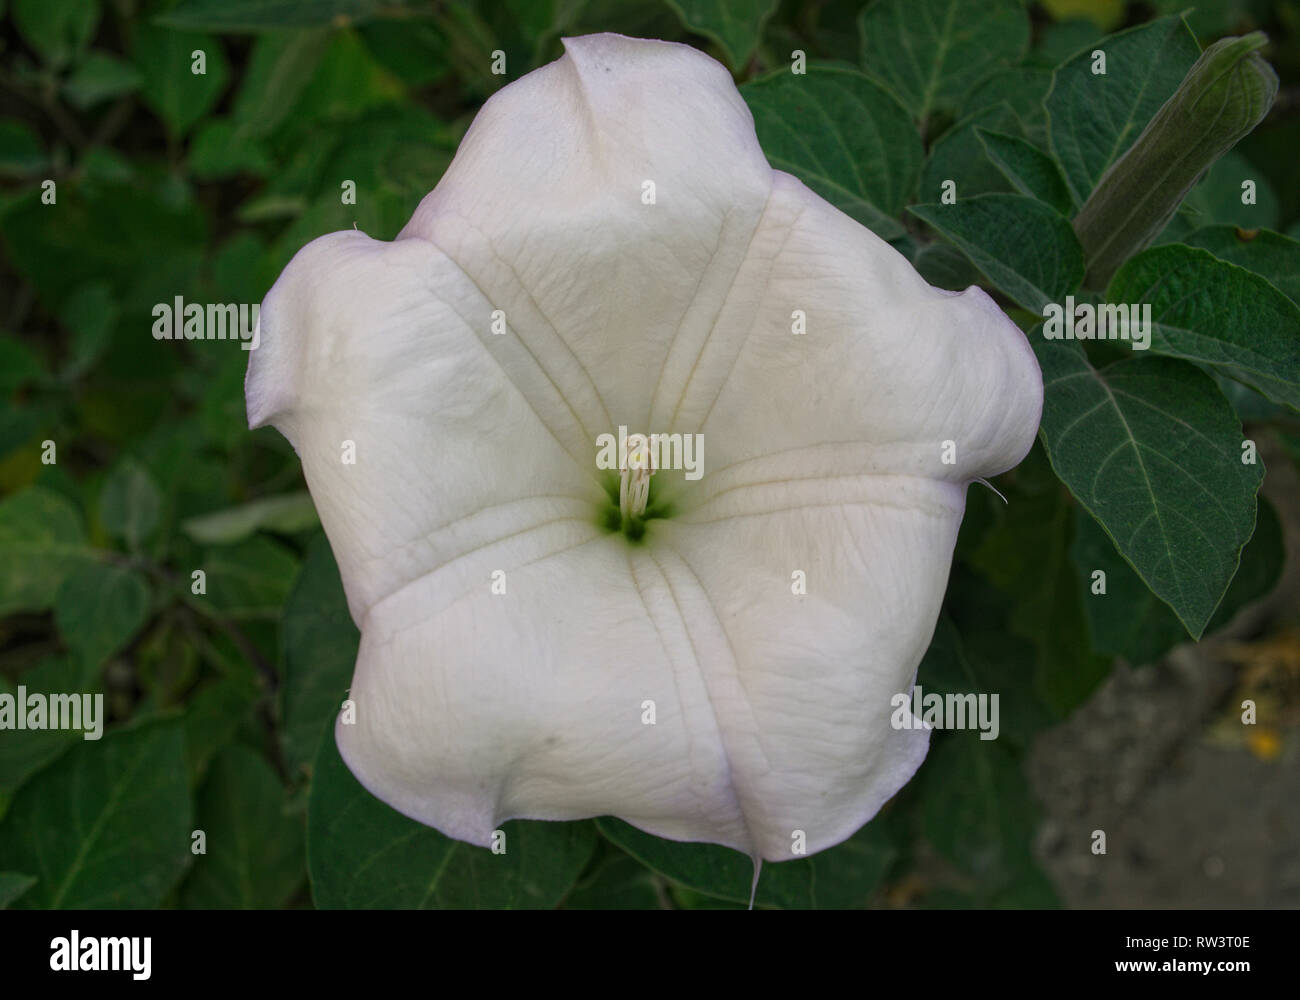 Closeup view on big white lily flower Stock Photo